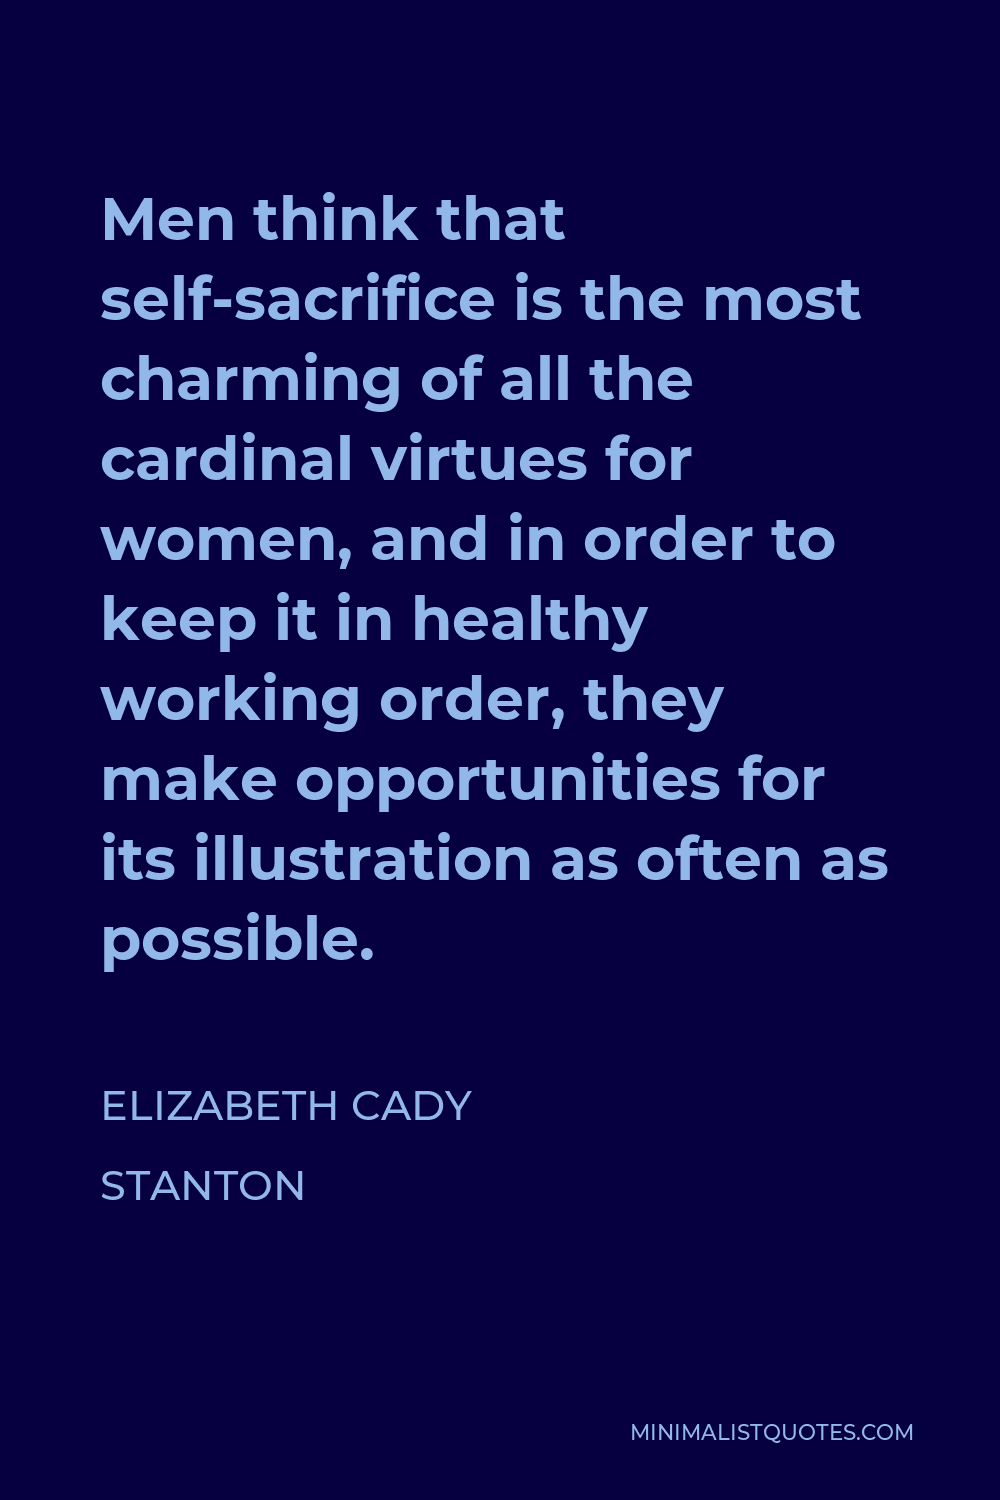 Elizabeth Cady Stanton Quote - Men think that self-sacrifice is the most charming of all the cardinal virtues for women, and in order to keep it in healthy working order, they make opportunities for its illustration as often as possible.